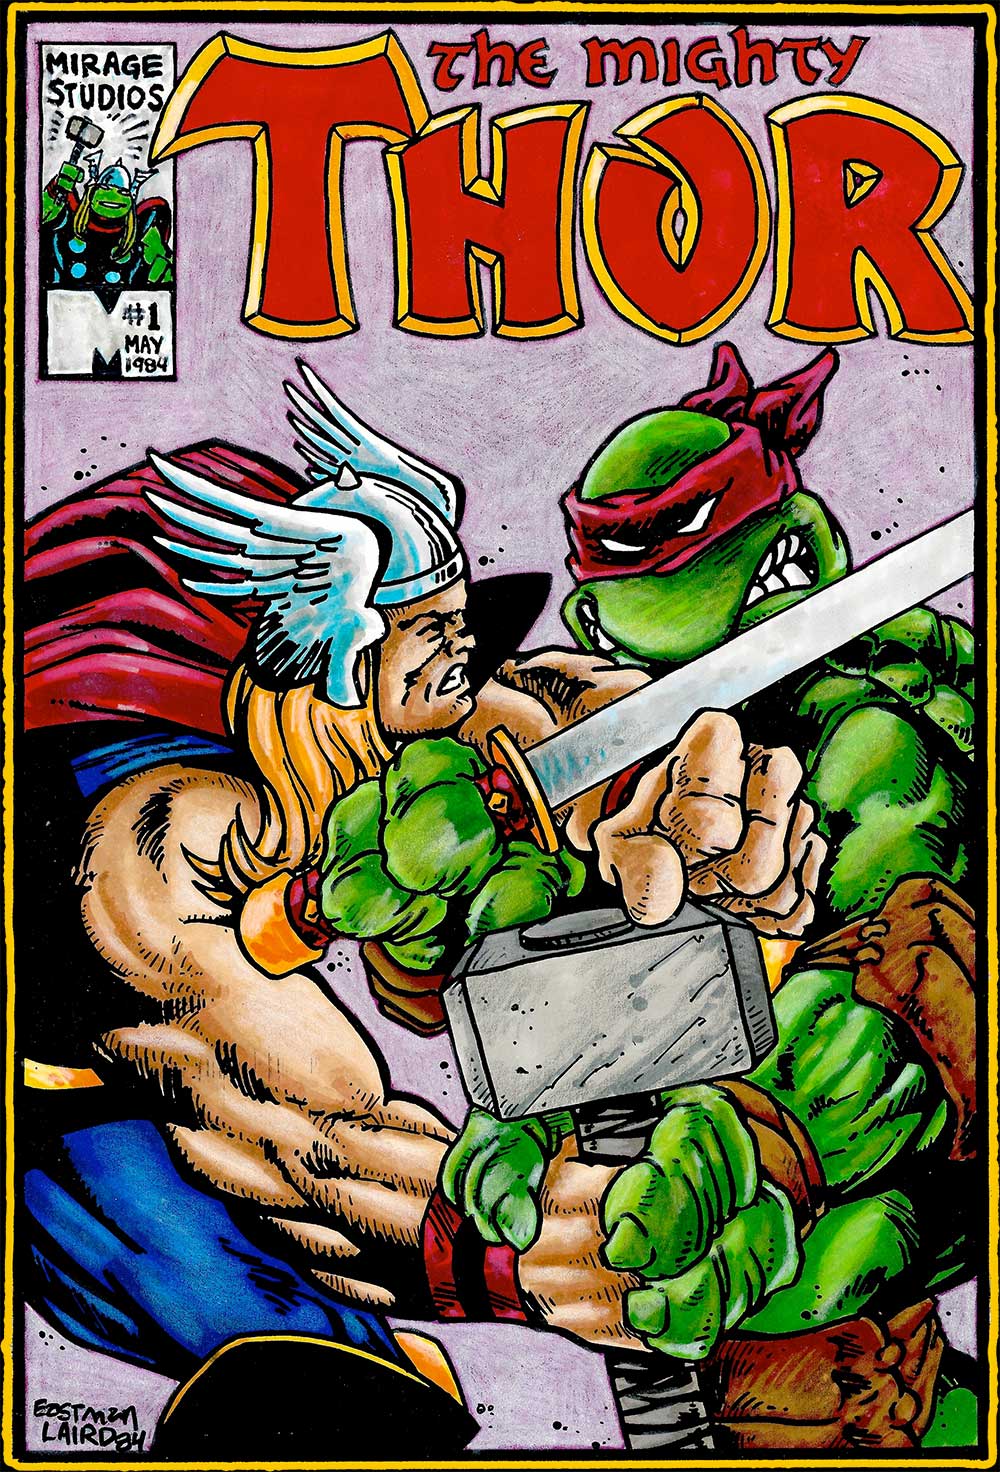 UPDATED: Eastman Designed TMNT/THOR Tee of the Week - Awesome TMNT History Story too